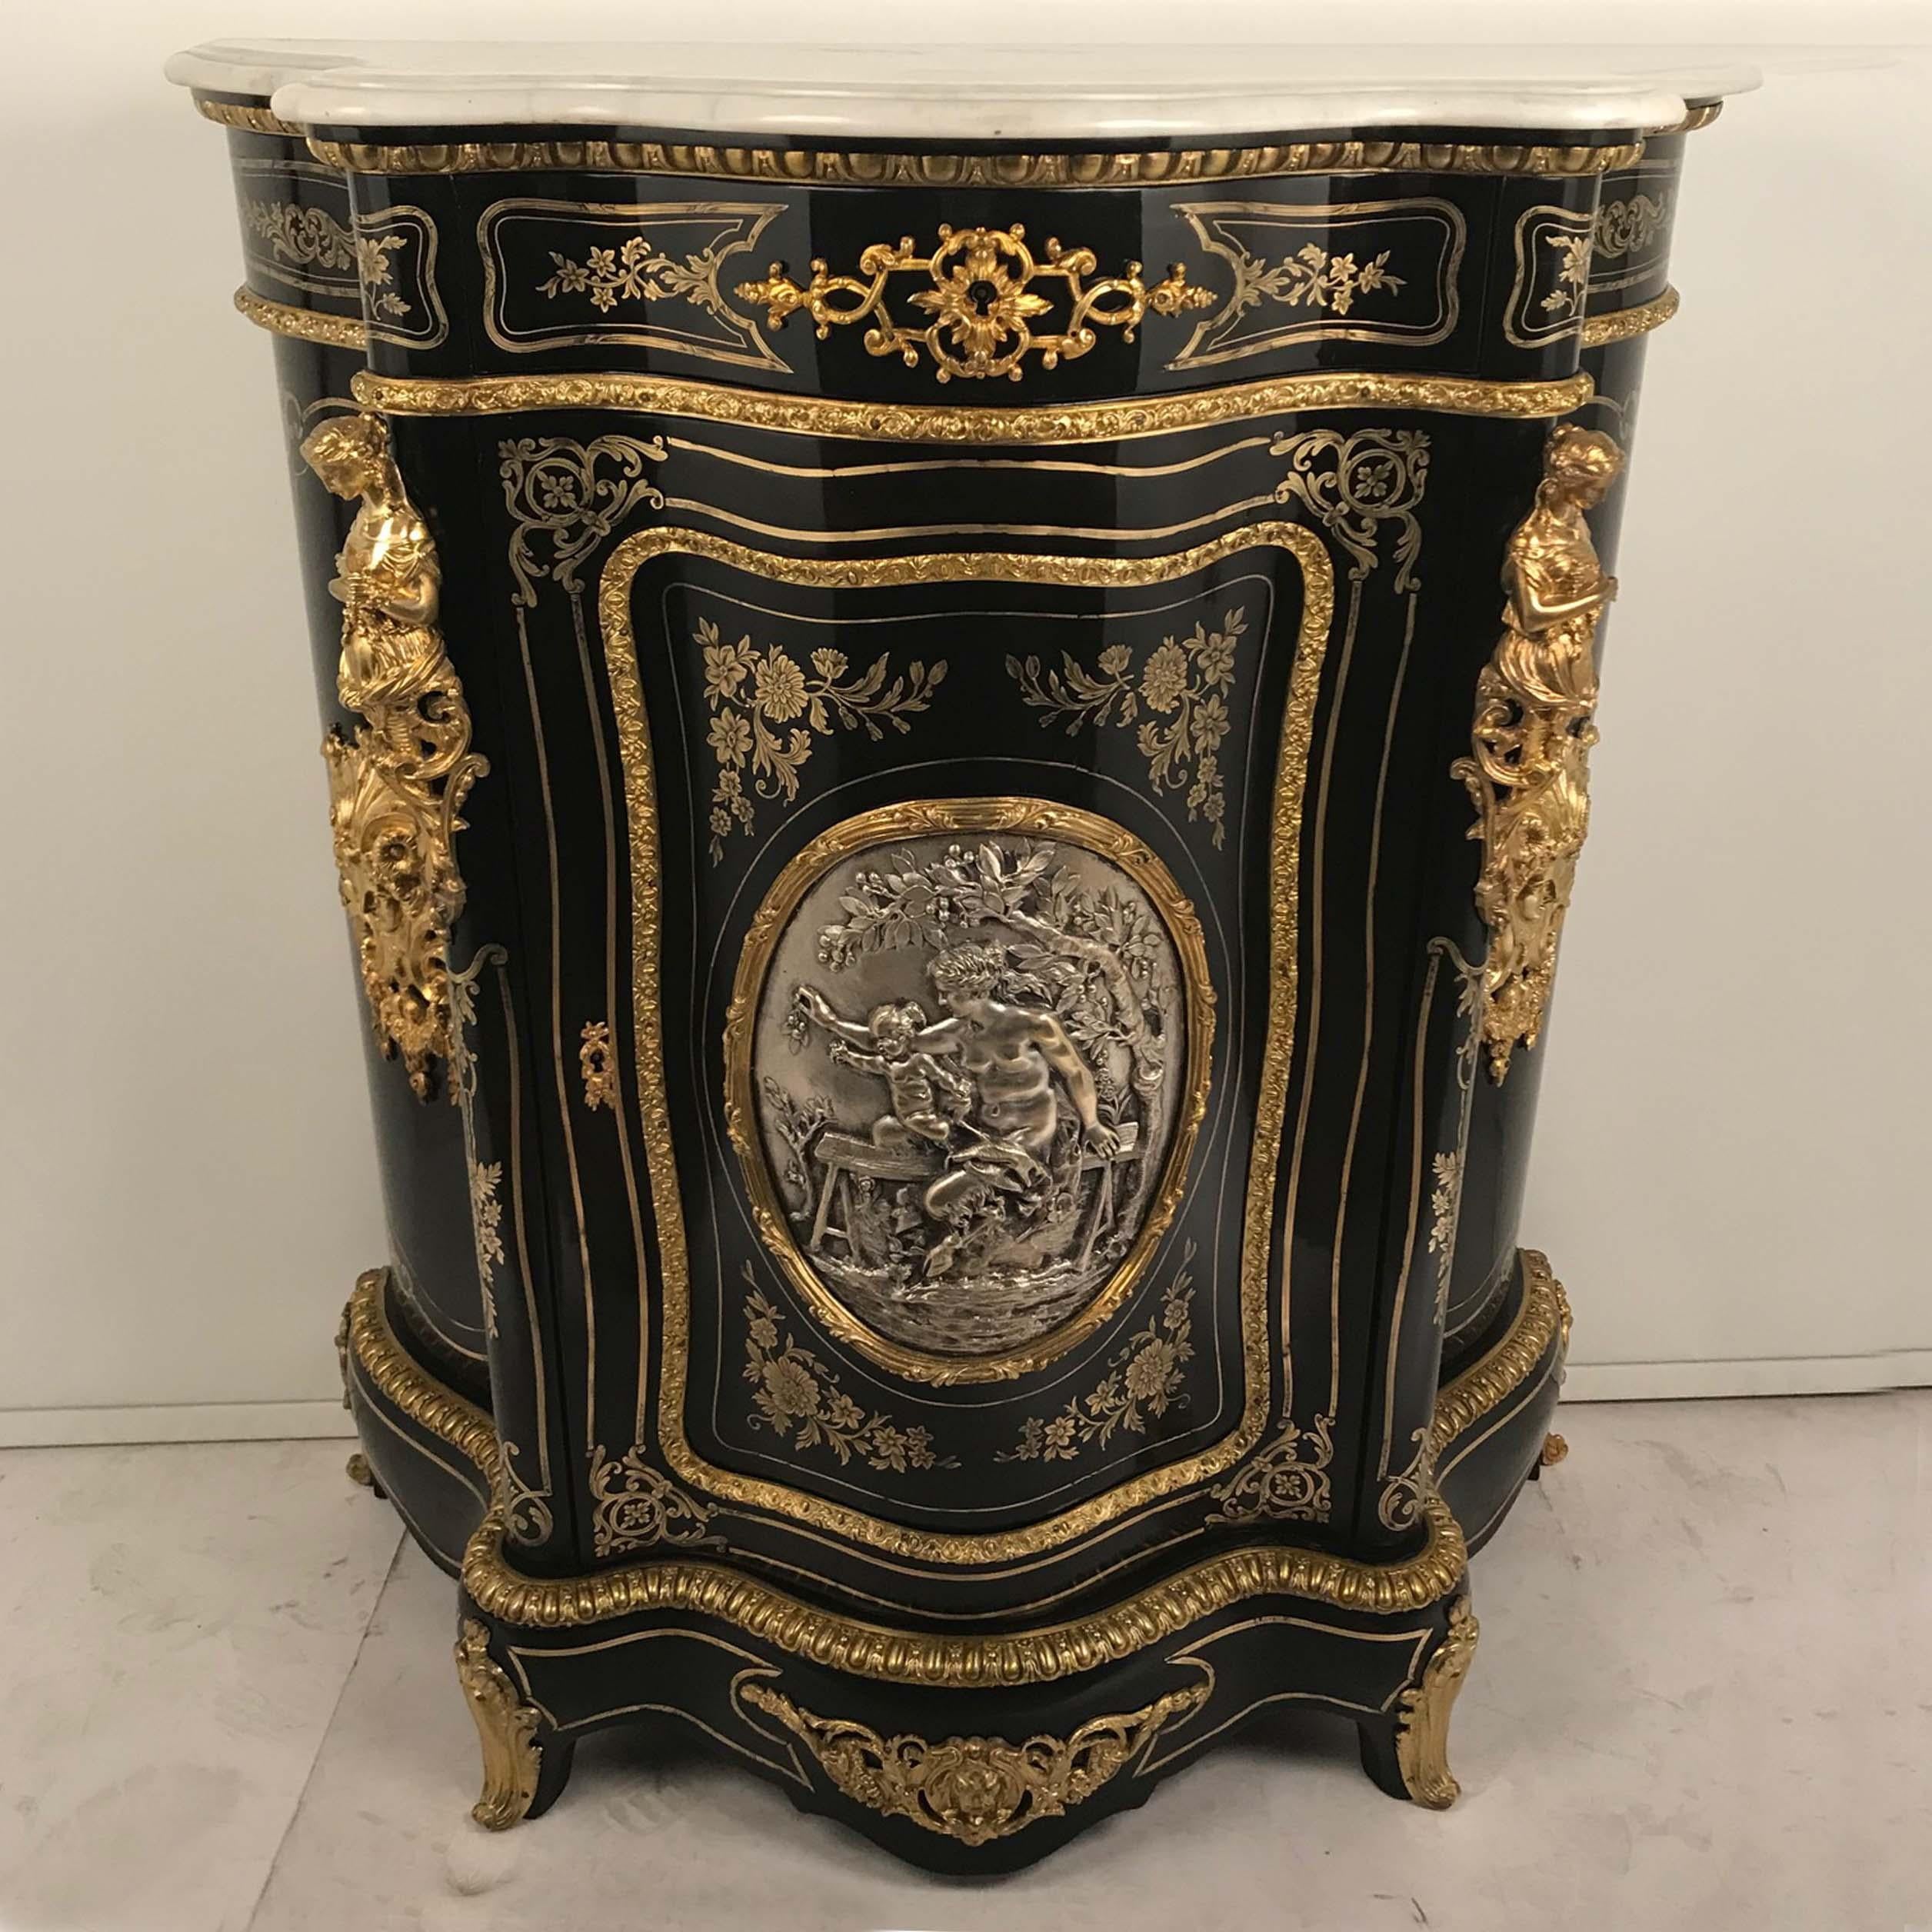 This fine side cabinet is unusually small but crafted to the highest standard. The serpentine outline, cut-brass, ornamental mounts, and choice of timber are all of outstanding quality. It is centred with a large shaped silvered bronze panel of